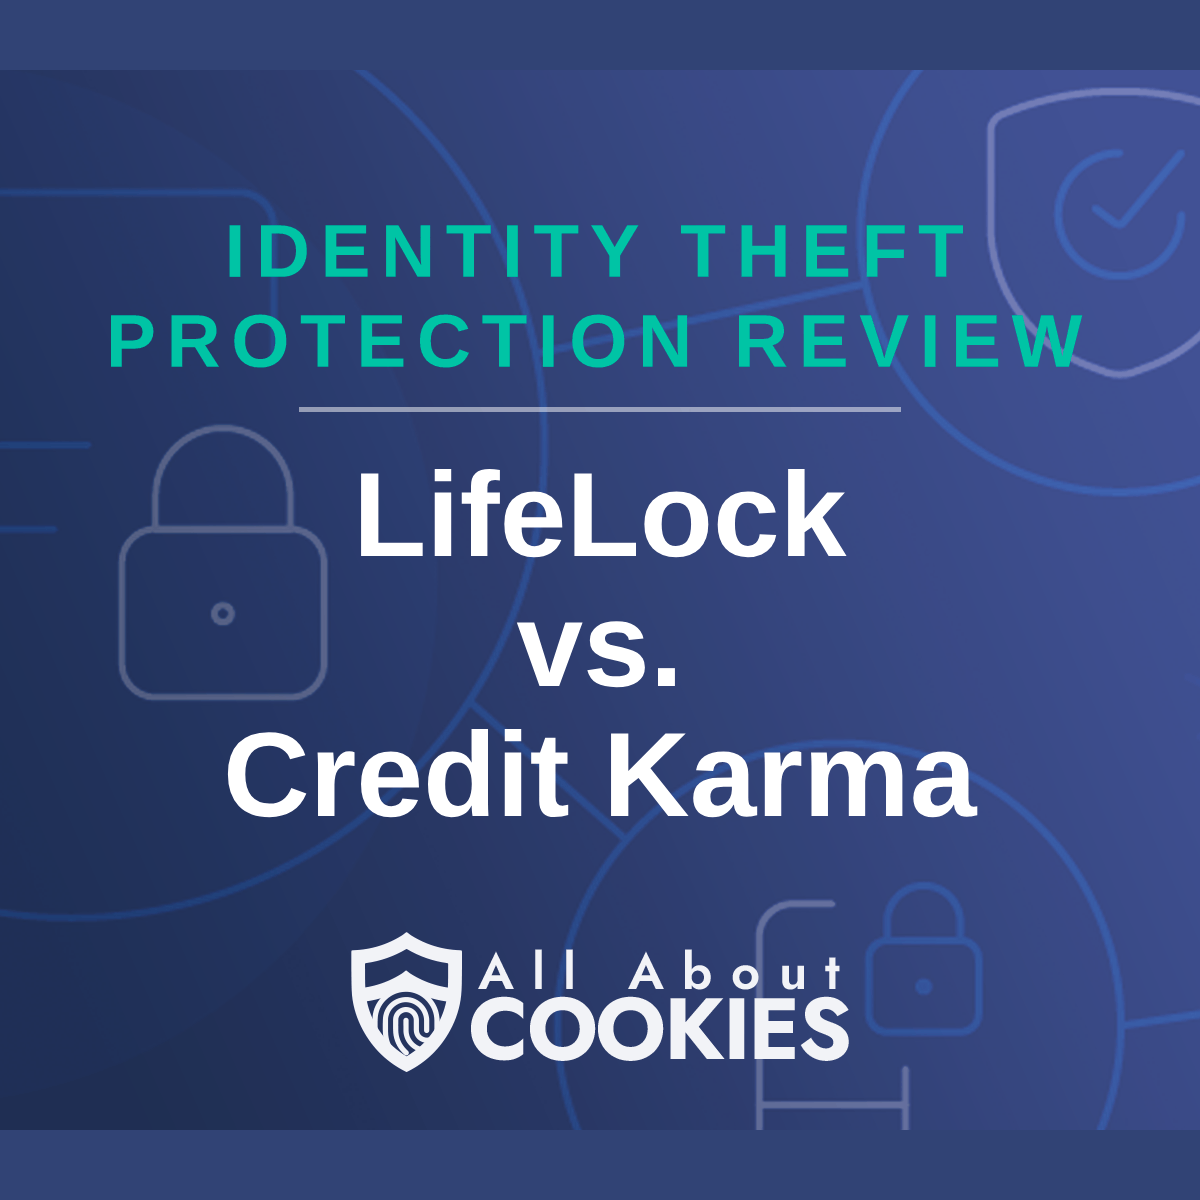 A blue background with images of locks and shields with the text &quot;LifeLock vs Credit Karma&quot; and the All About Cookies logo. 